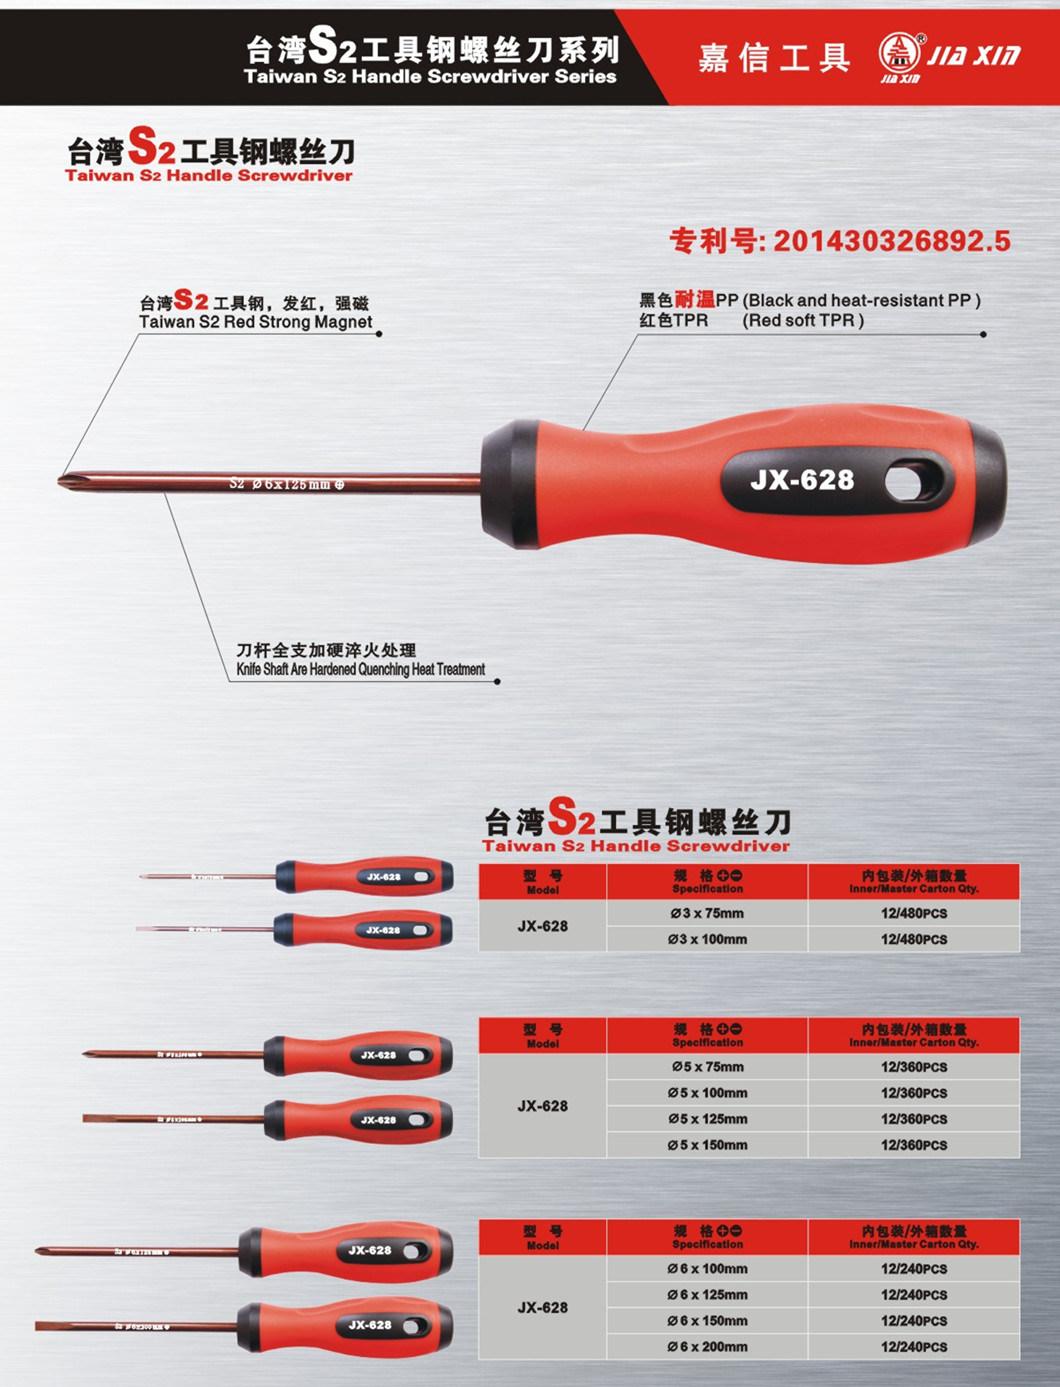 High Quality Screwdriver Set with Hollow Handle for Increased Torque